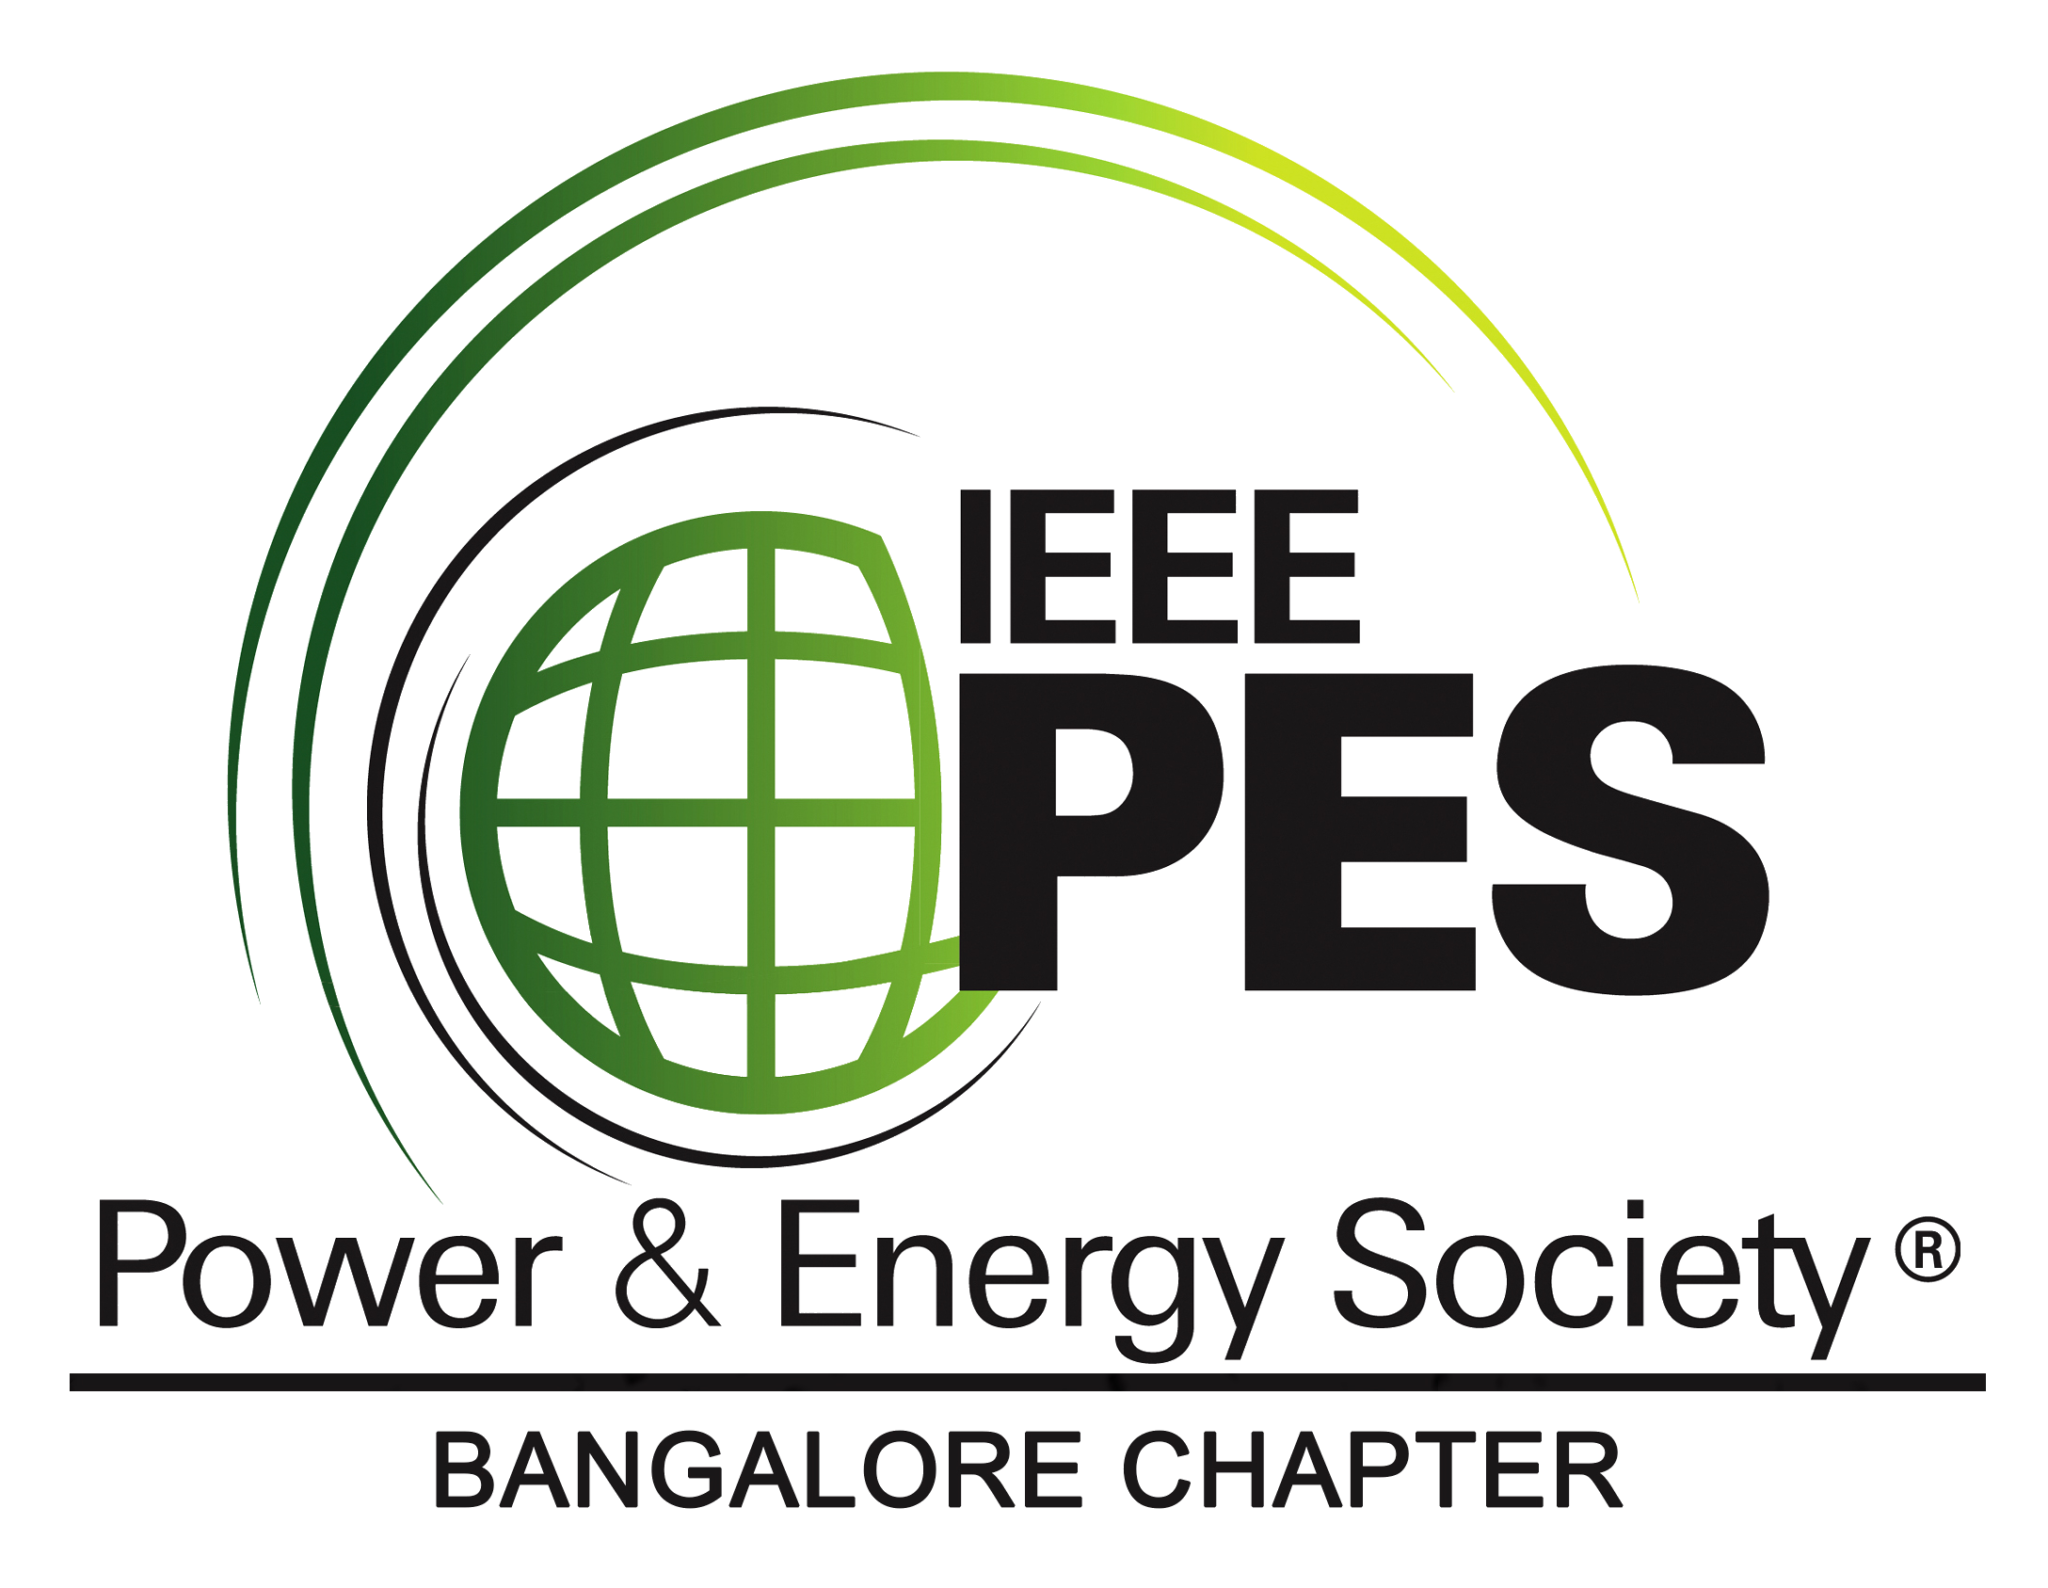 Events from February 25 April 20, 2020 IEEE Power and Energy